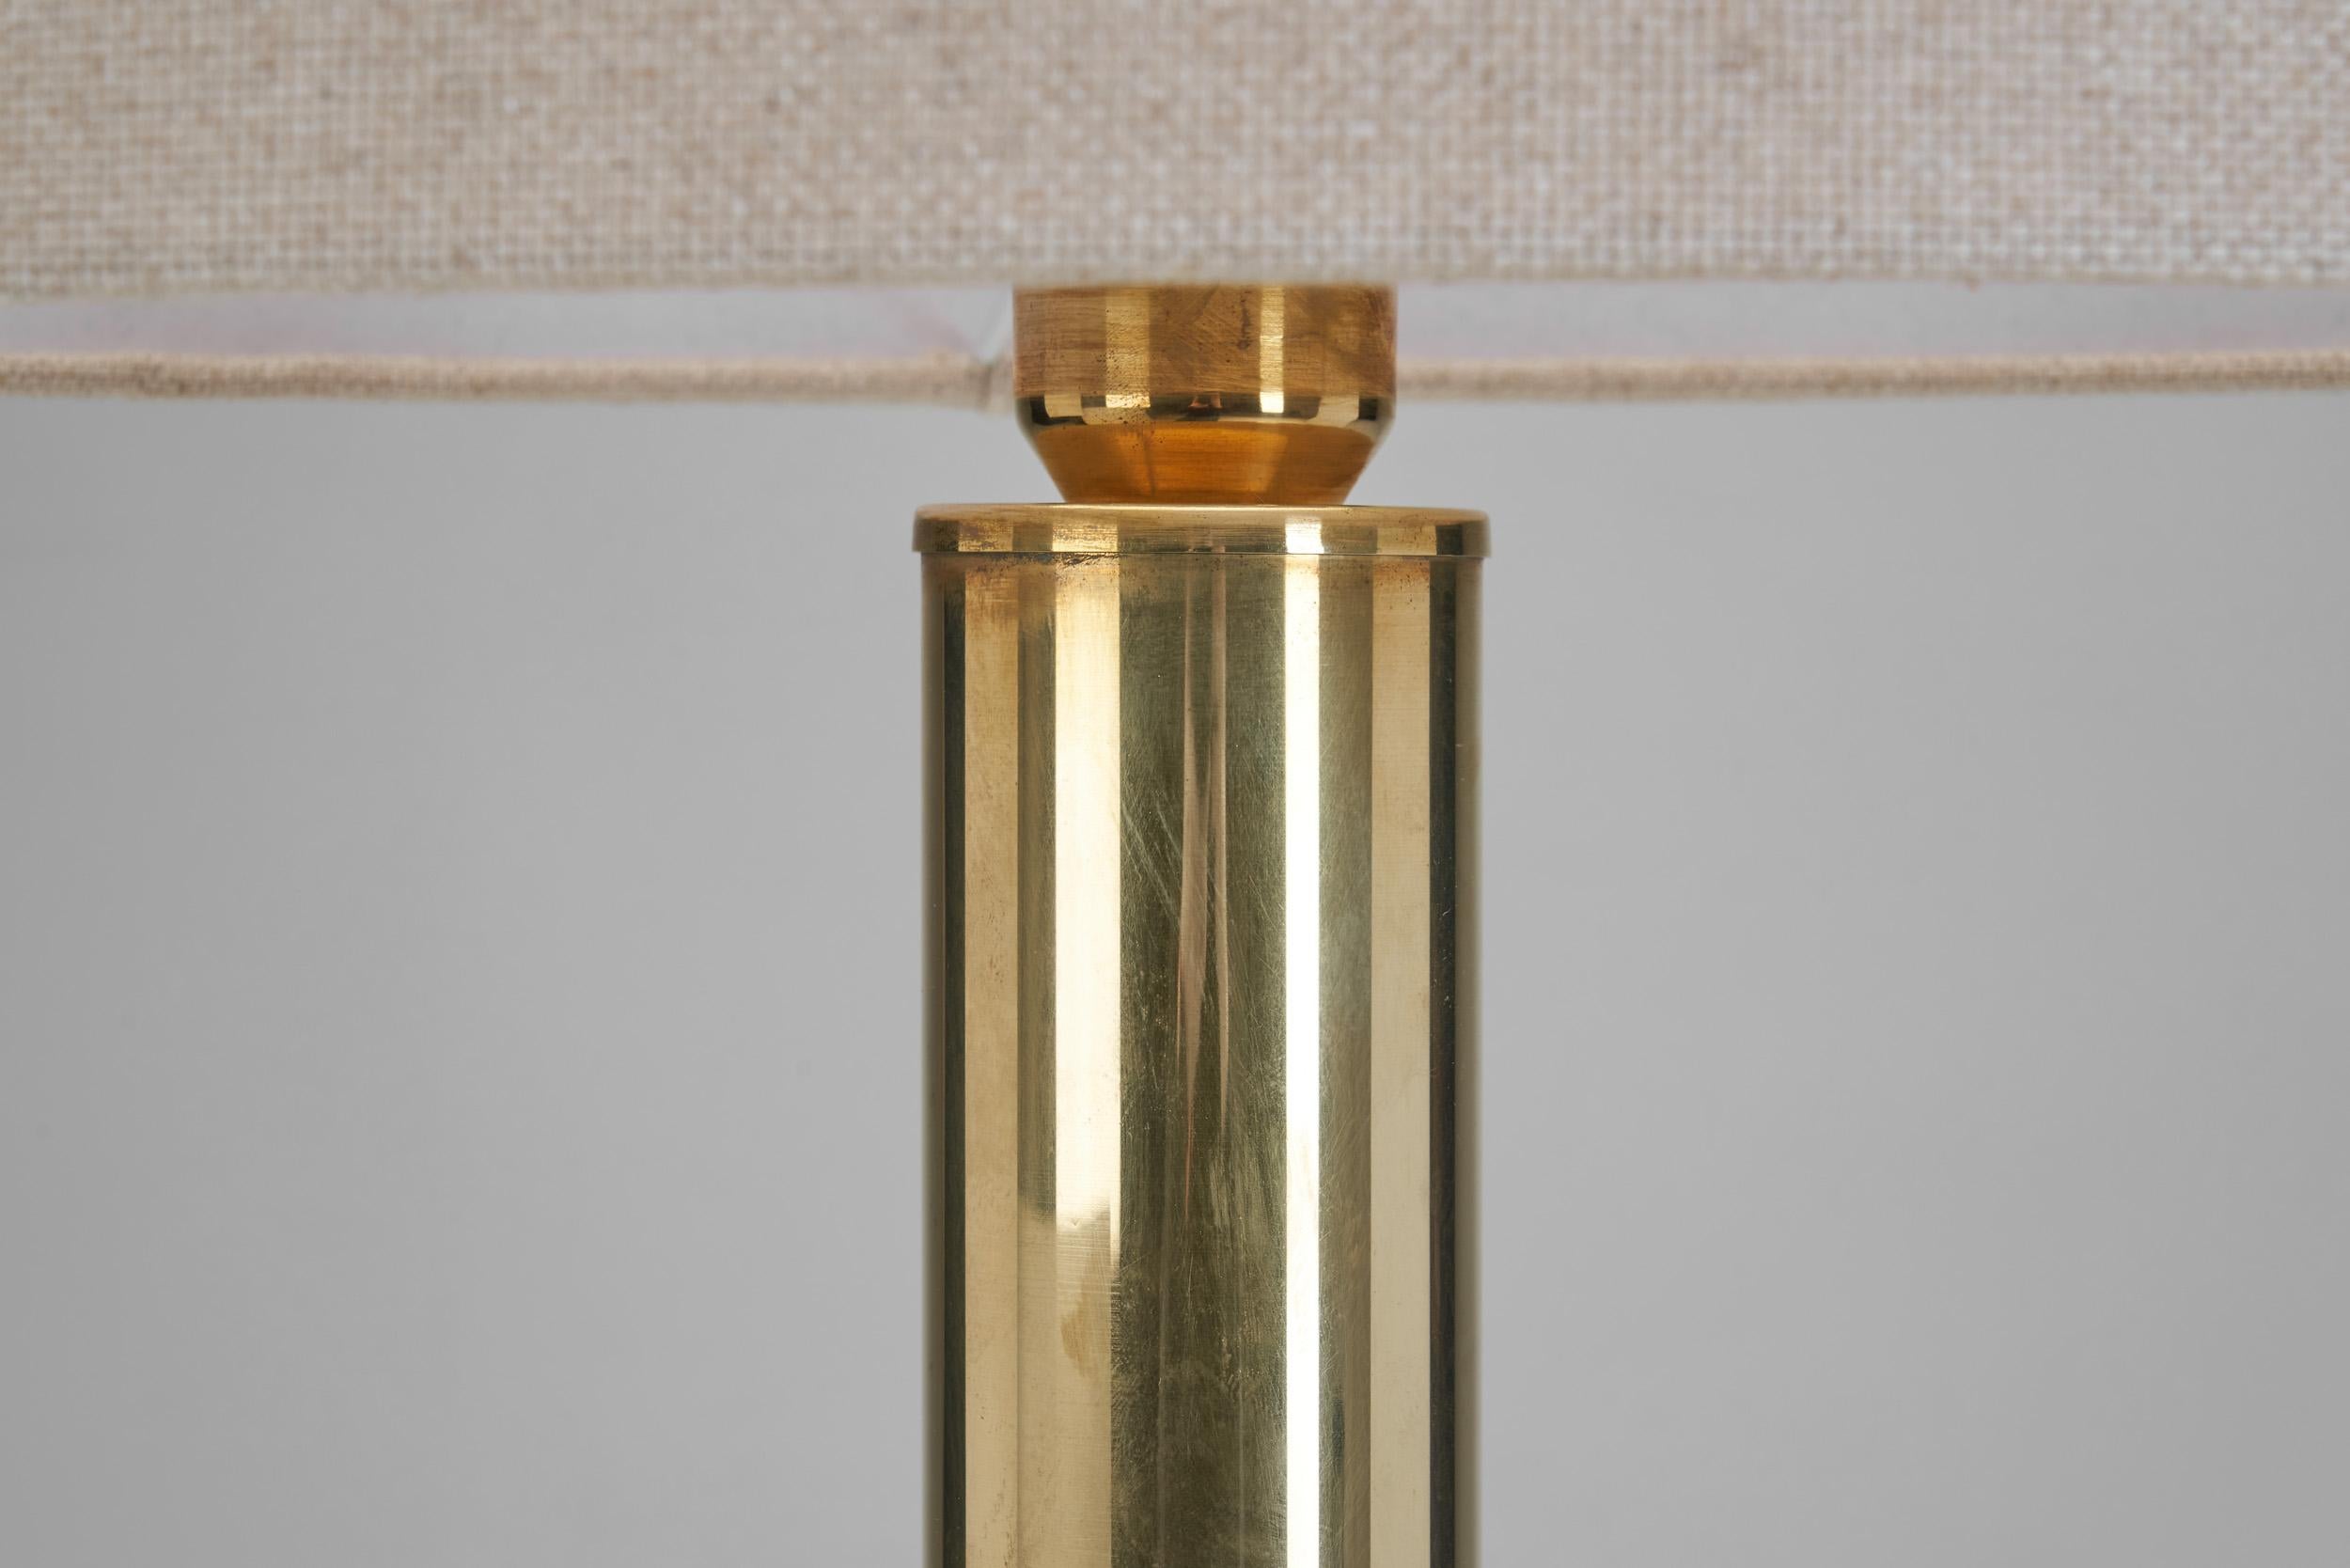 Large Swedish Modern Brass Table Lamps by Kosta Elarmatur, Sweden ca 1960s For Sale 7